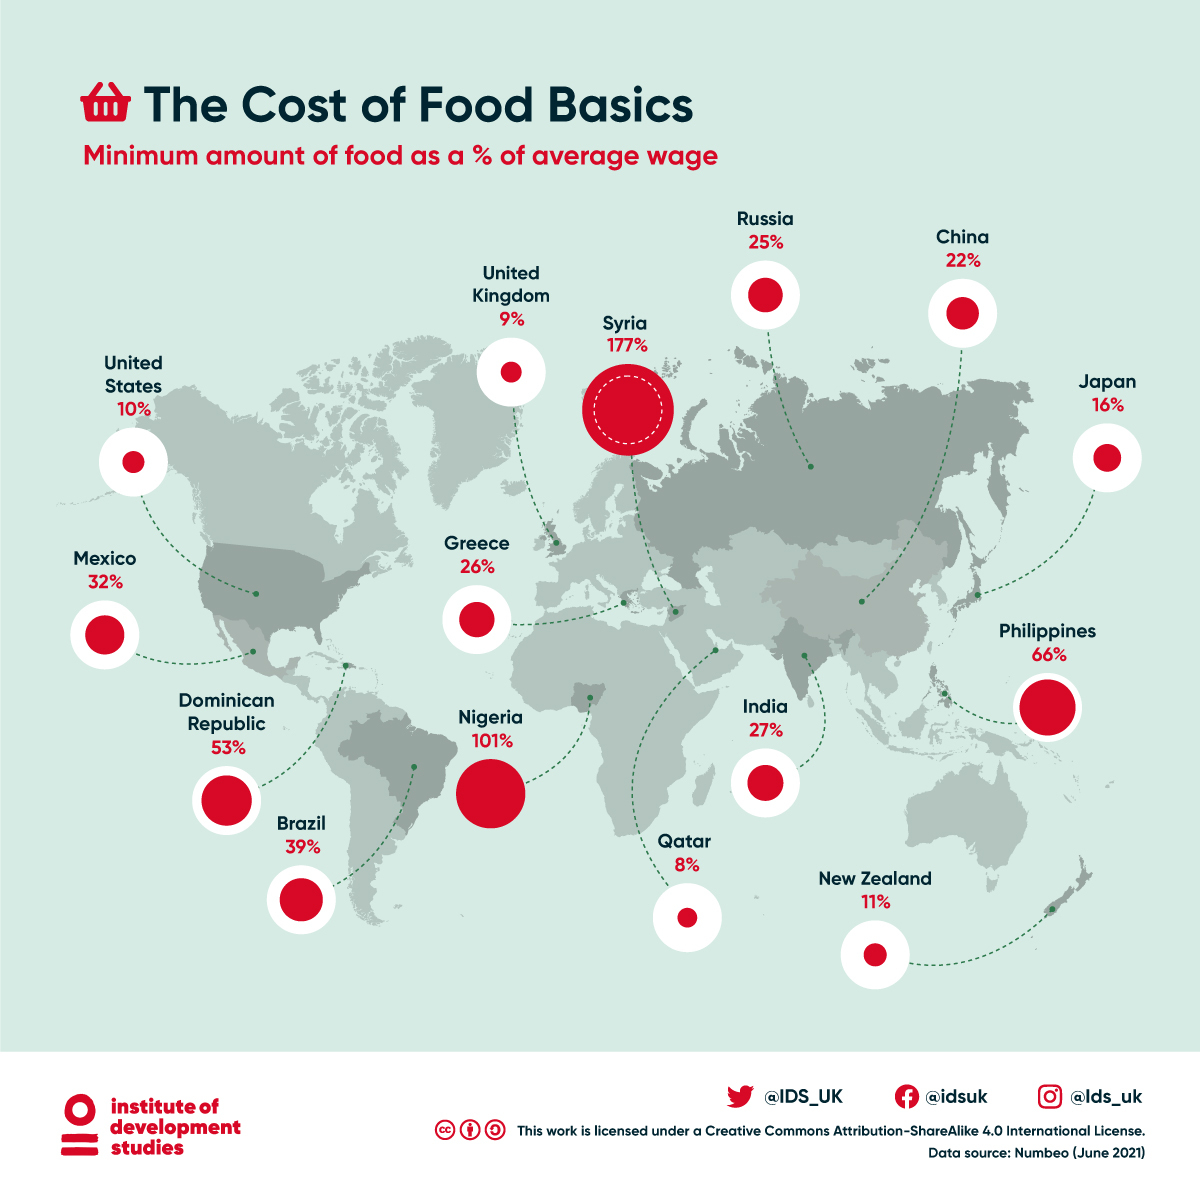 Map showing the minimum amount of food as a percentage of average wage in 15 countries